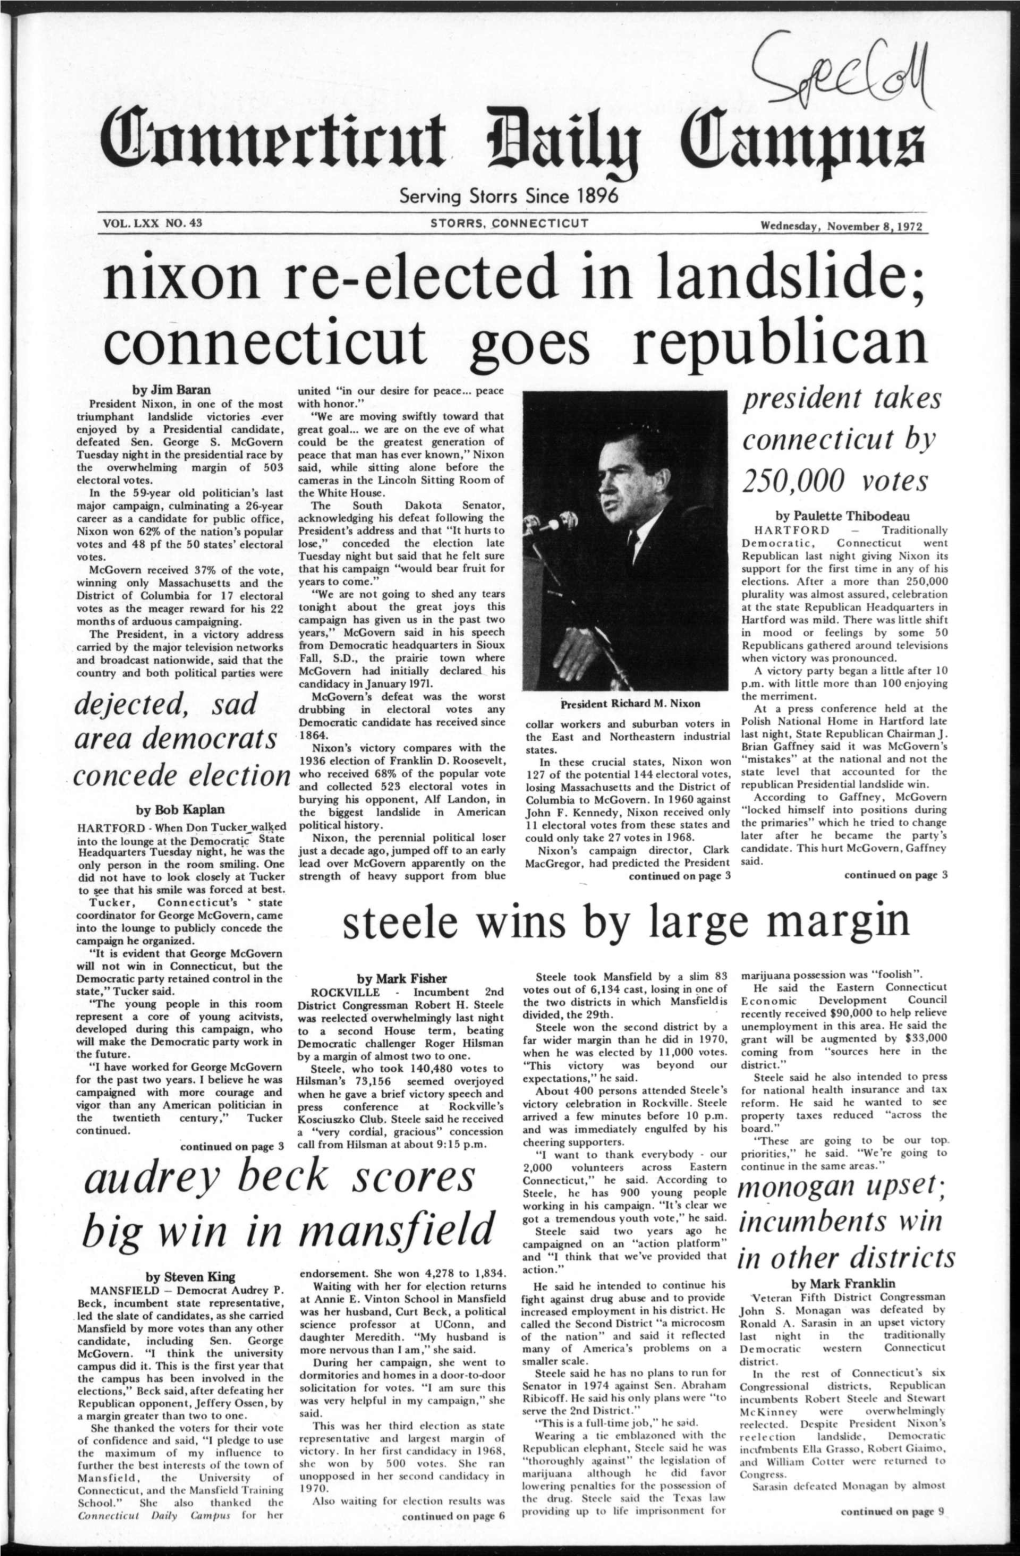 Connecticut Goes Republican by Jim Baran United "In Our Desire for Peace